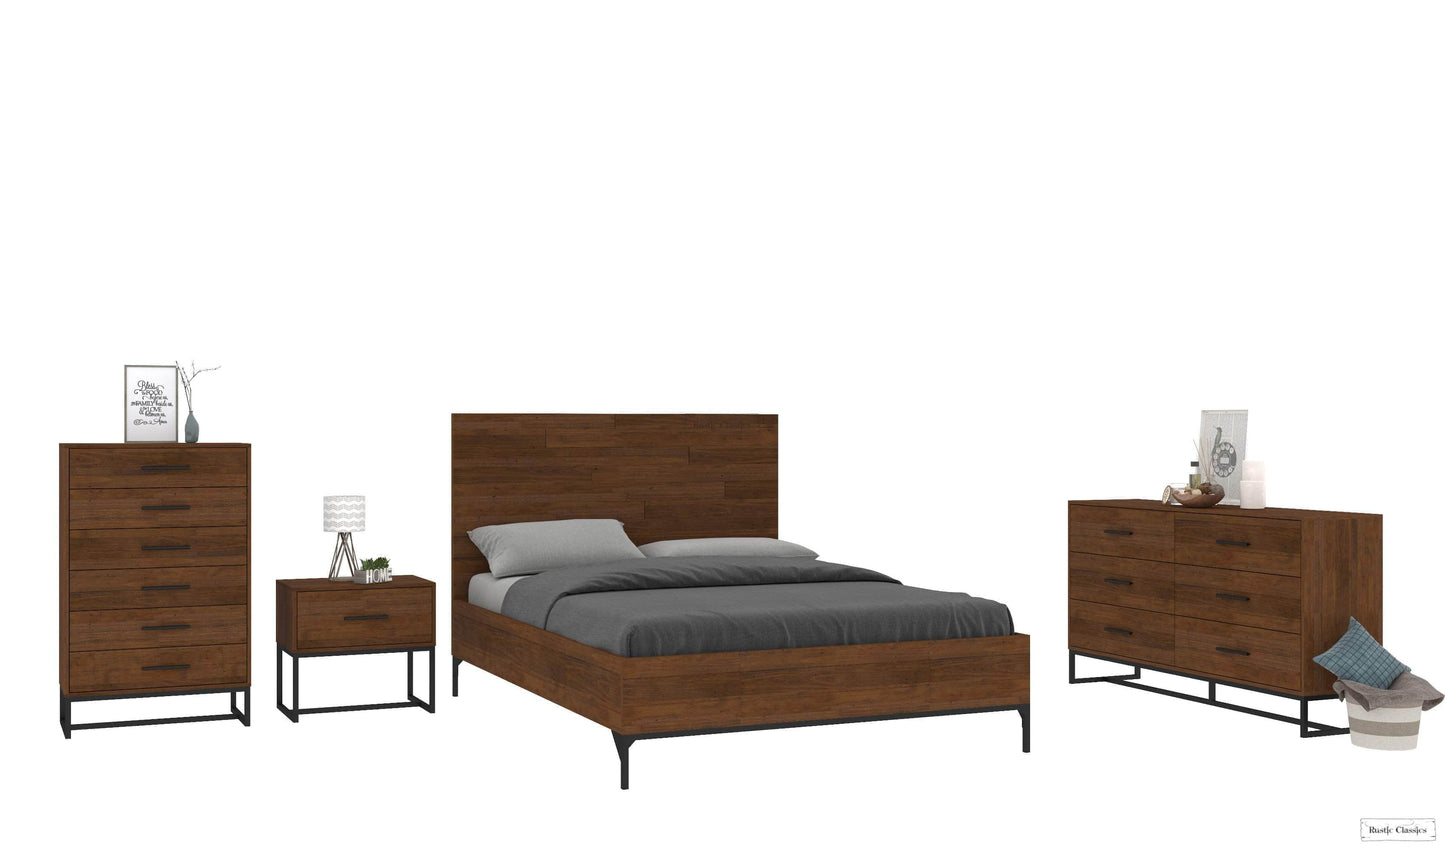 Rustic Classics Bedroom Set Queen Bed, Nightstand, Dresser and Chest Blackcomb 4 Piece Reclaimed Wood and Metal Platform Bedroom Furniture Set in Coffee Bean - Available in 2 Sizes